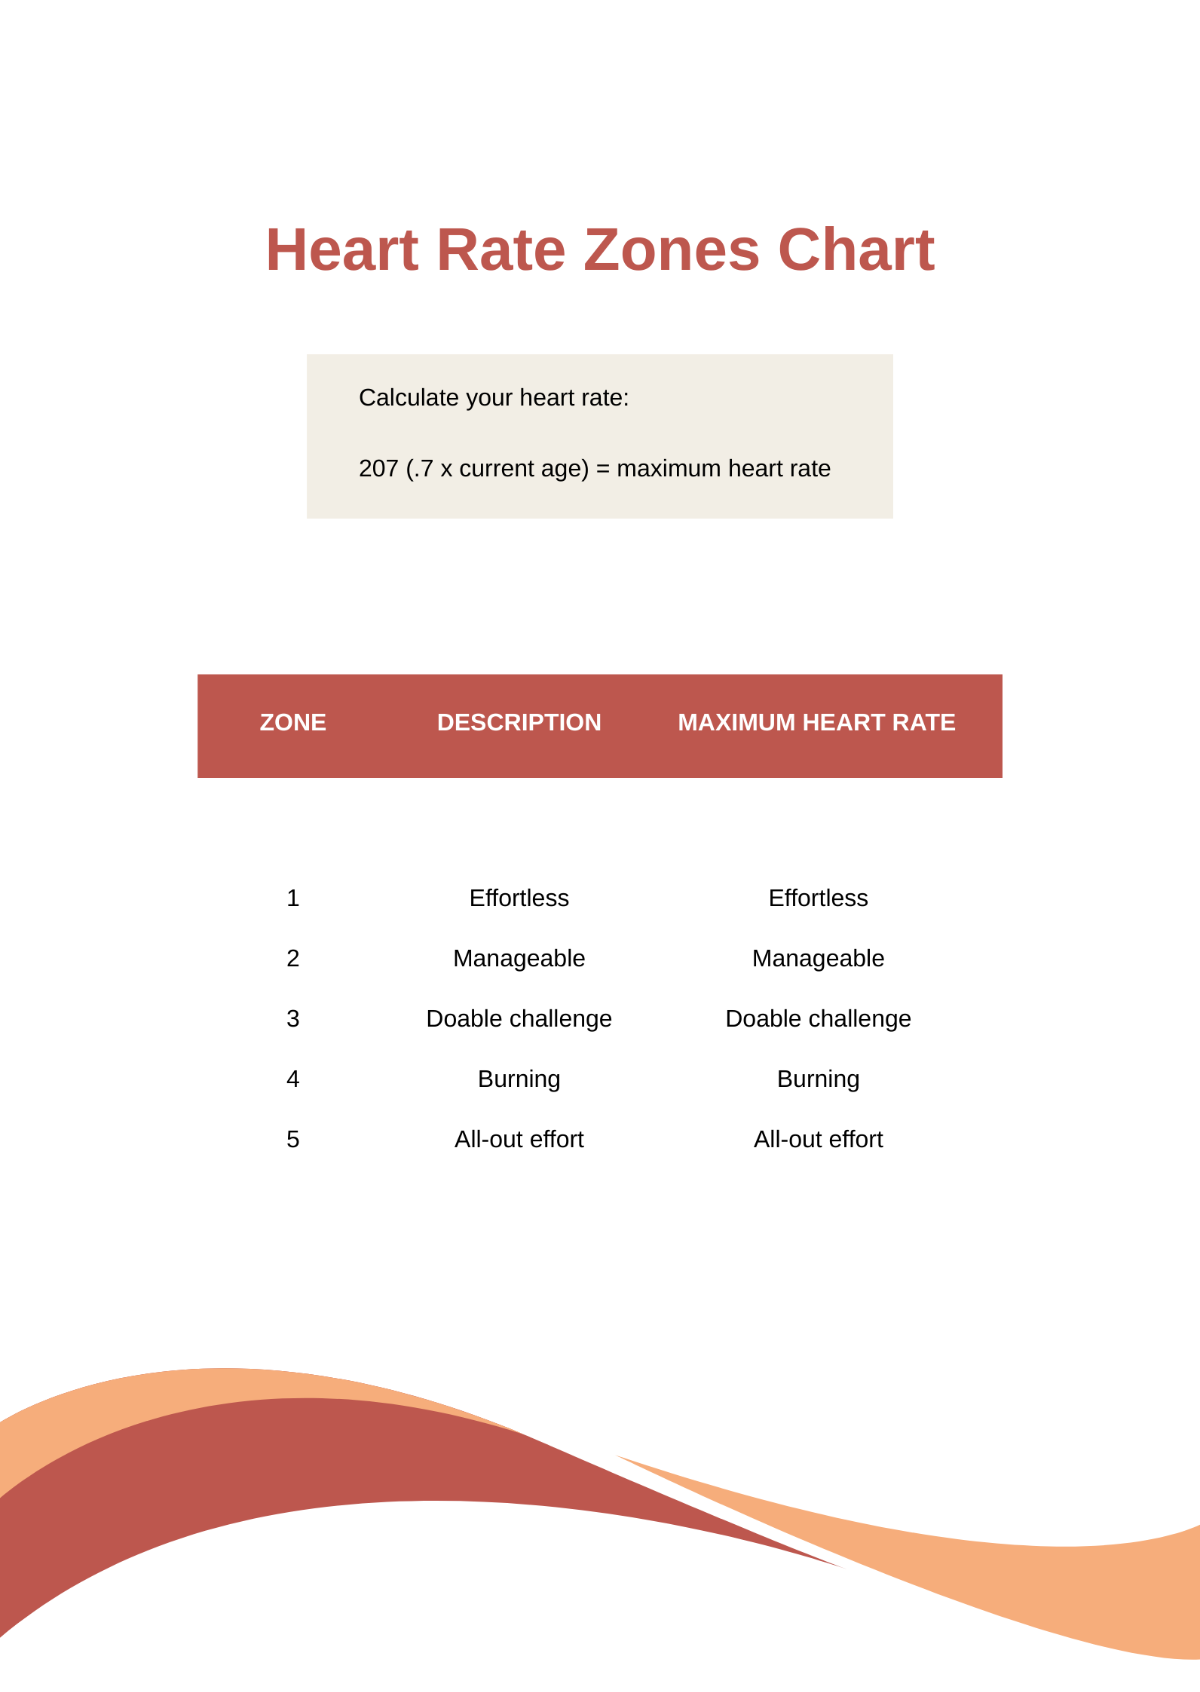 Heart Rate Zones Chart Template